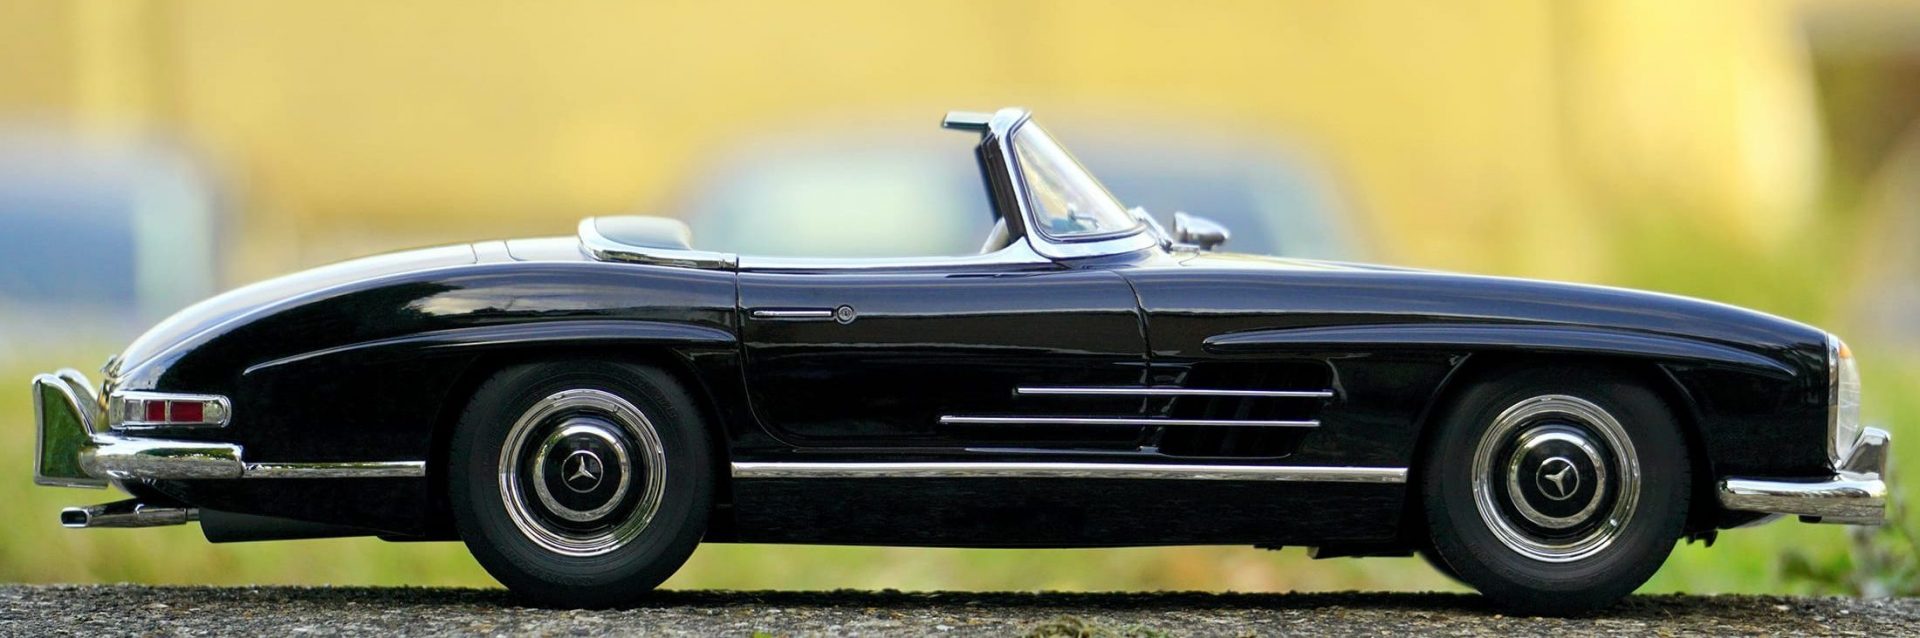 Side view of Mercedes classic car